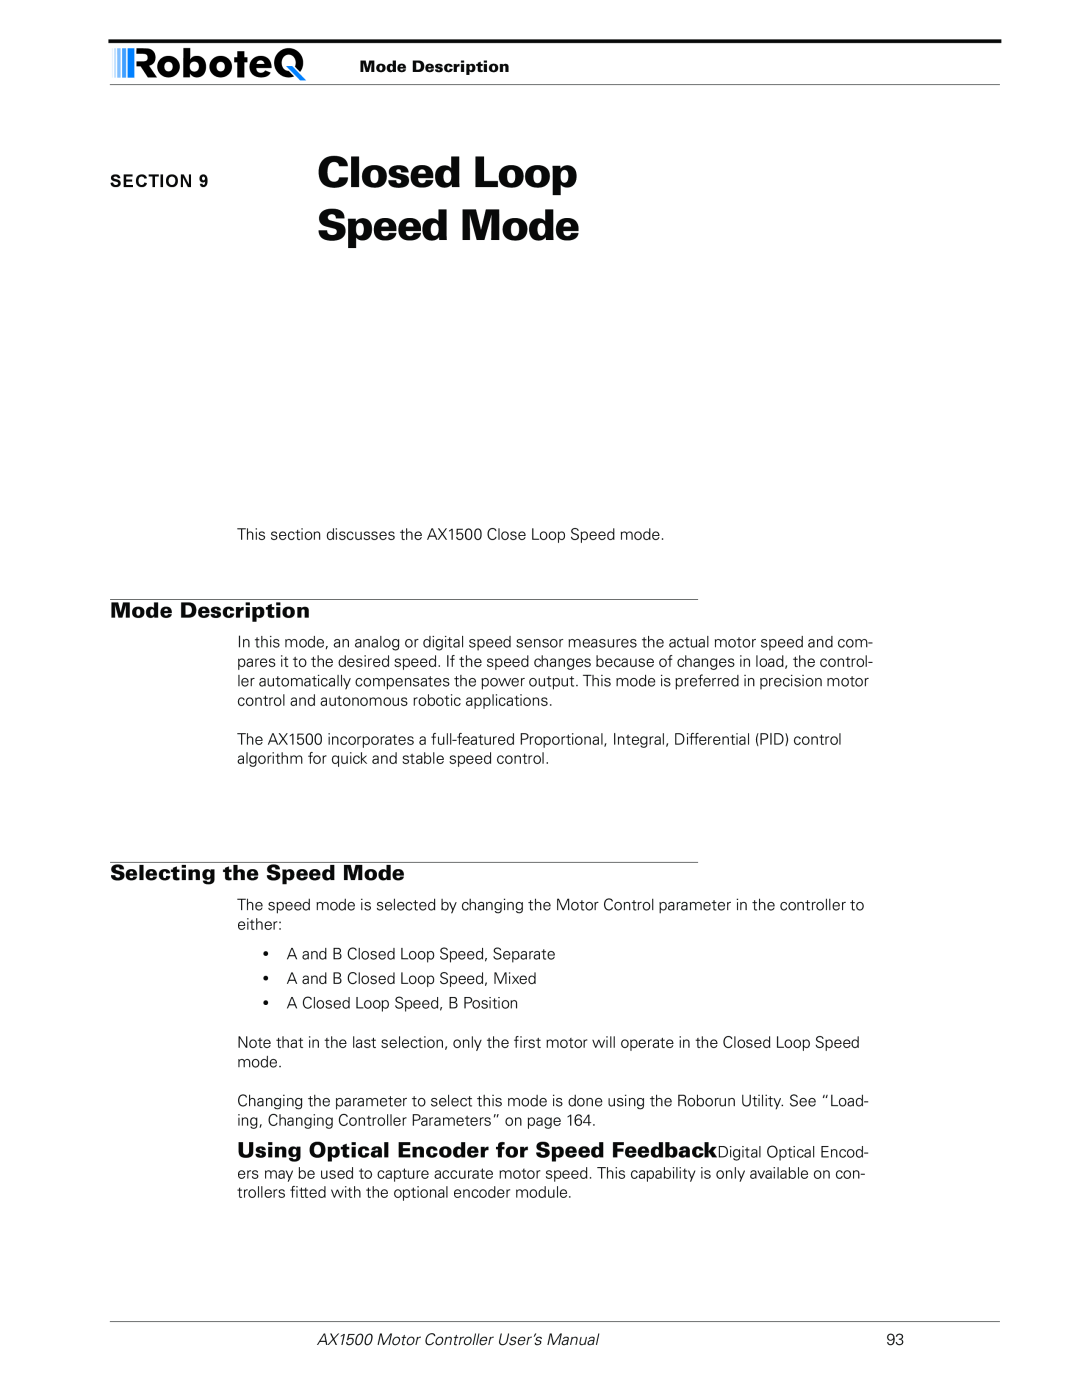 RoboteQ Closed Loop Speed Mode, Selecting the Speed Mode, Mode Description, AX1500 Motor Controller User’s Manual 